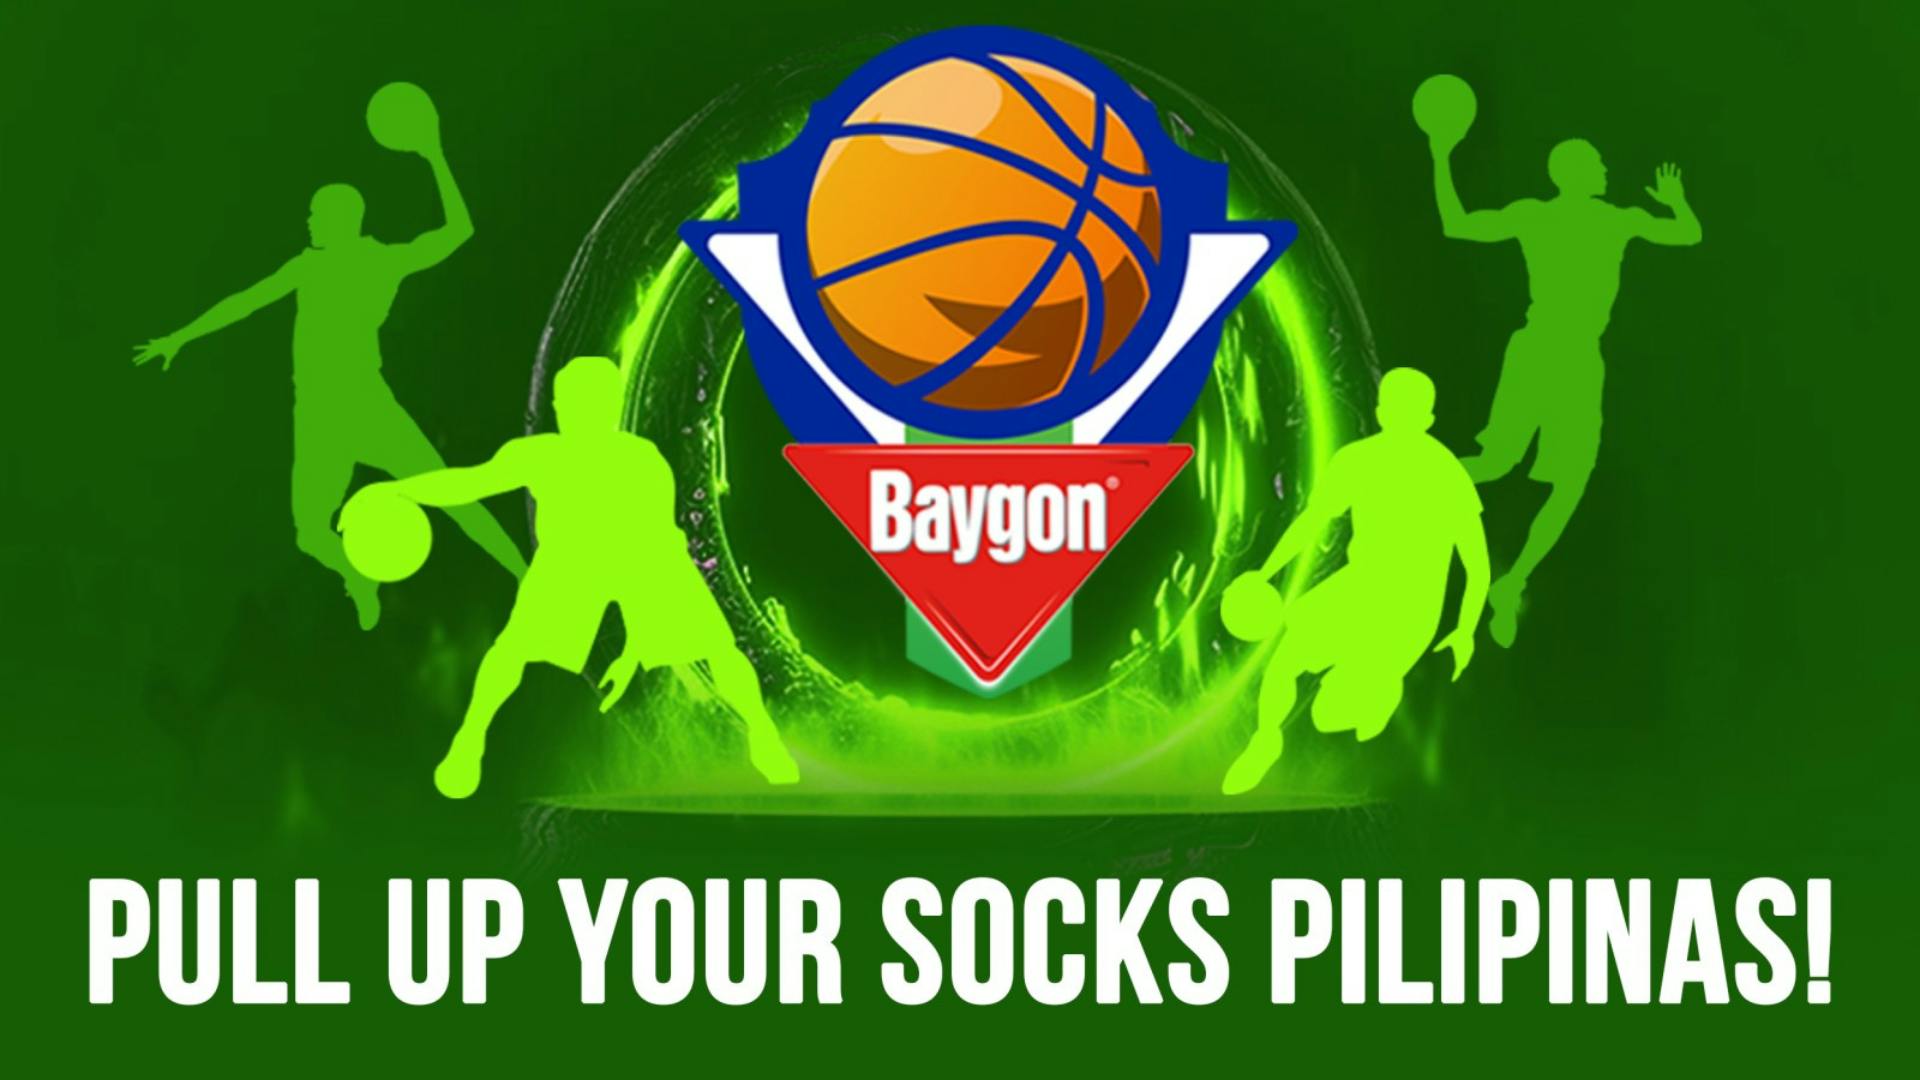 #PullUpYourSocks and support Gilas Pilipinas in the FIBA OQT with Baygon